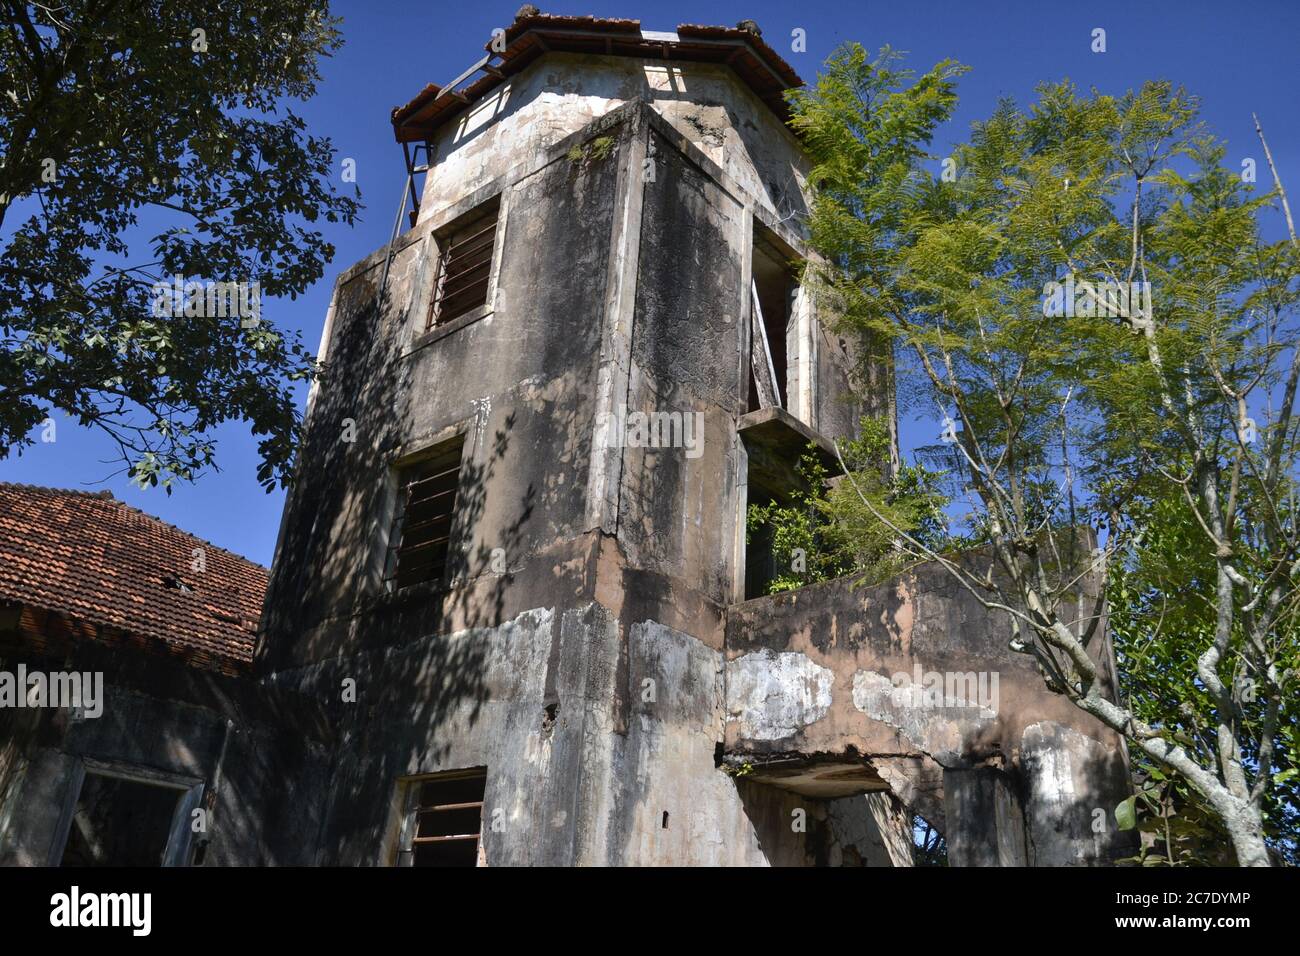 Tower. Abandoned hotel tower in the interior of Brazil, with vegetation and roof, old water tank, Brazil, South America, bottom-up view, with blue sky Stock Photo